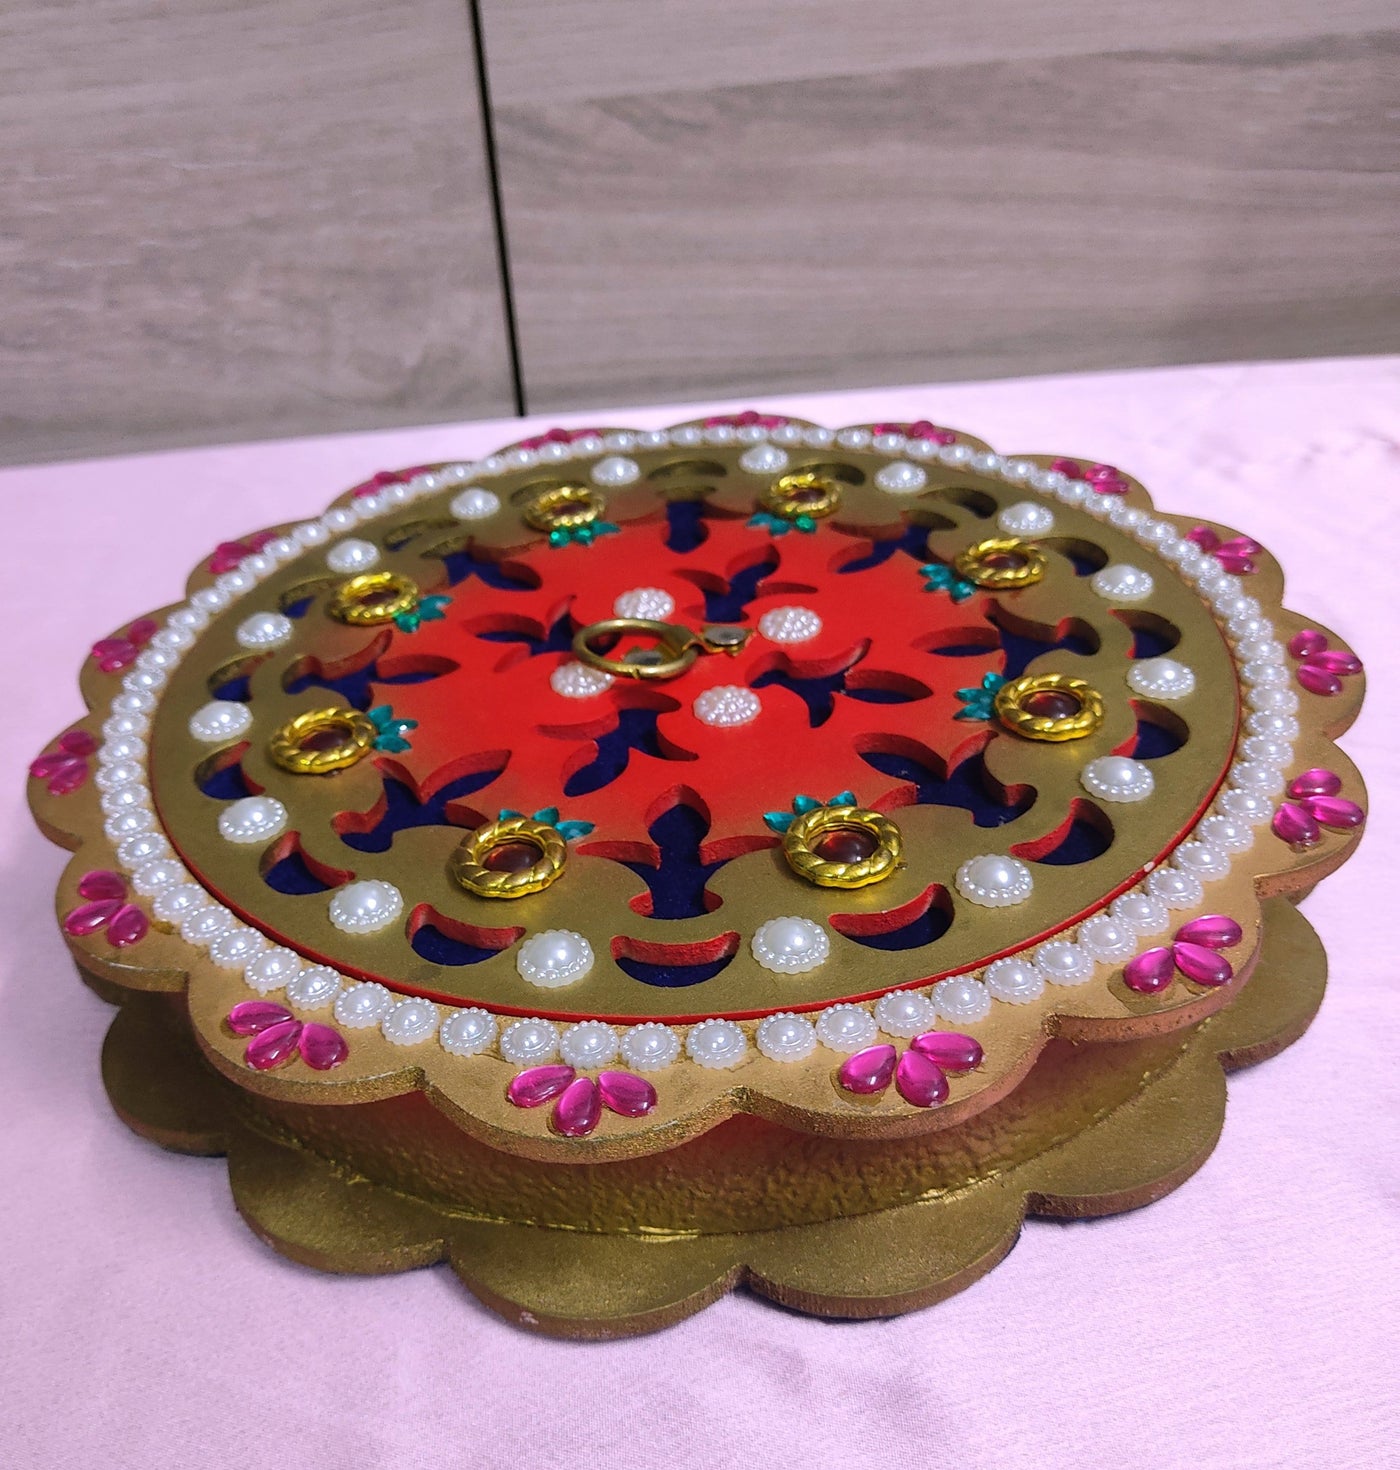 New Jaipur Handicraft Gift Baskets 💛 Multicolor / 26 cm diameter Lamansh® Round Laser cut Wooden Dry fruit boxes for Gifting / Multi compartment Antique look Box for Diwali , Gifting , Home Decor